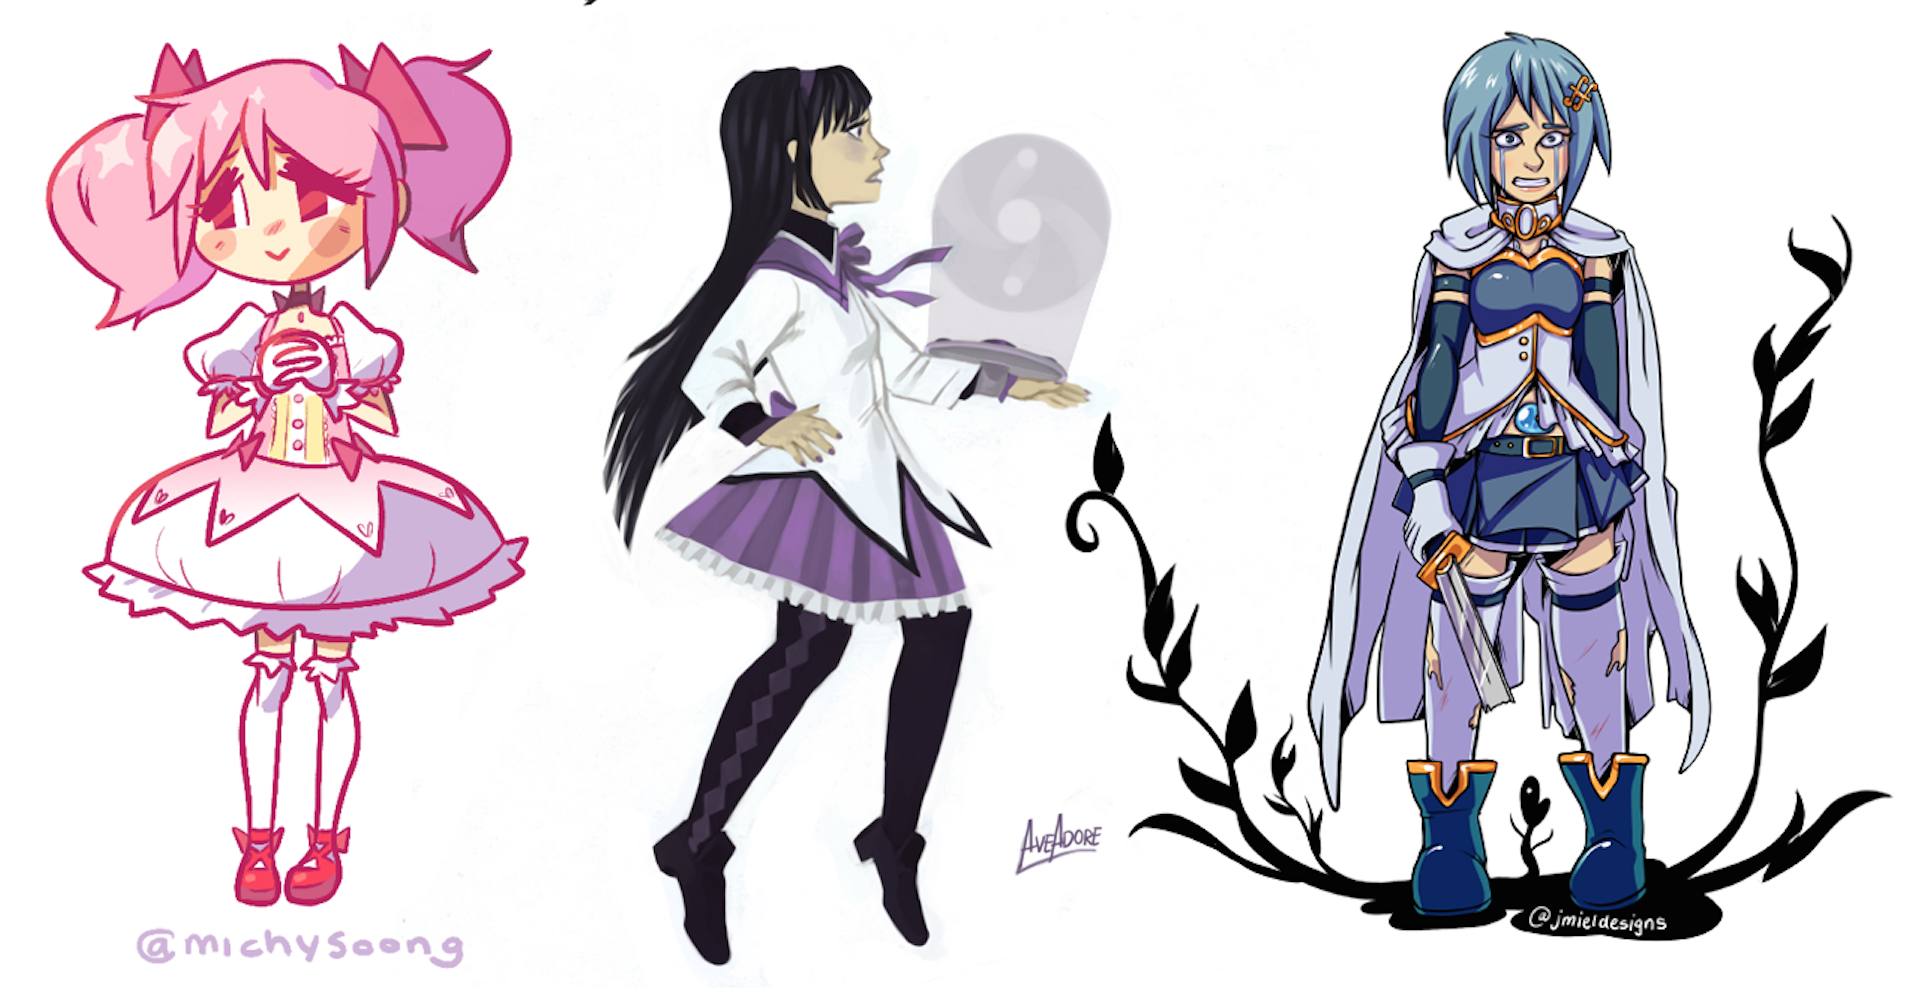 Artists Band Together To Celebrate Beloved Magical Girl Characters